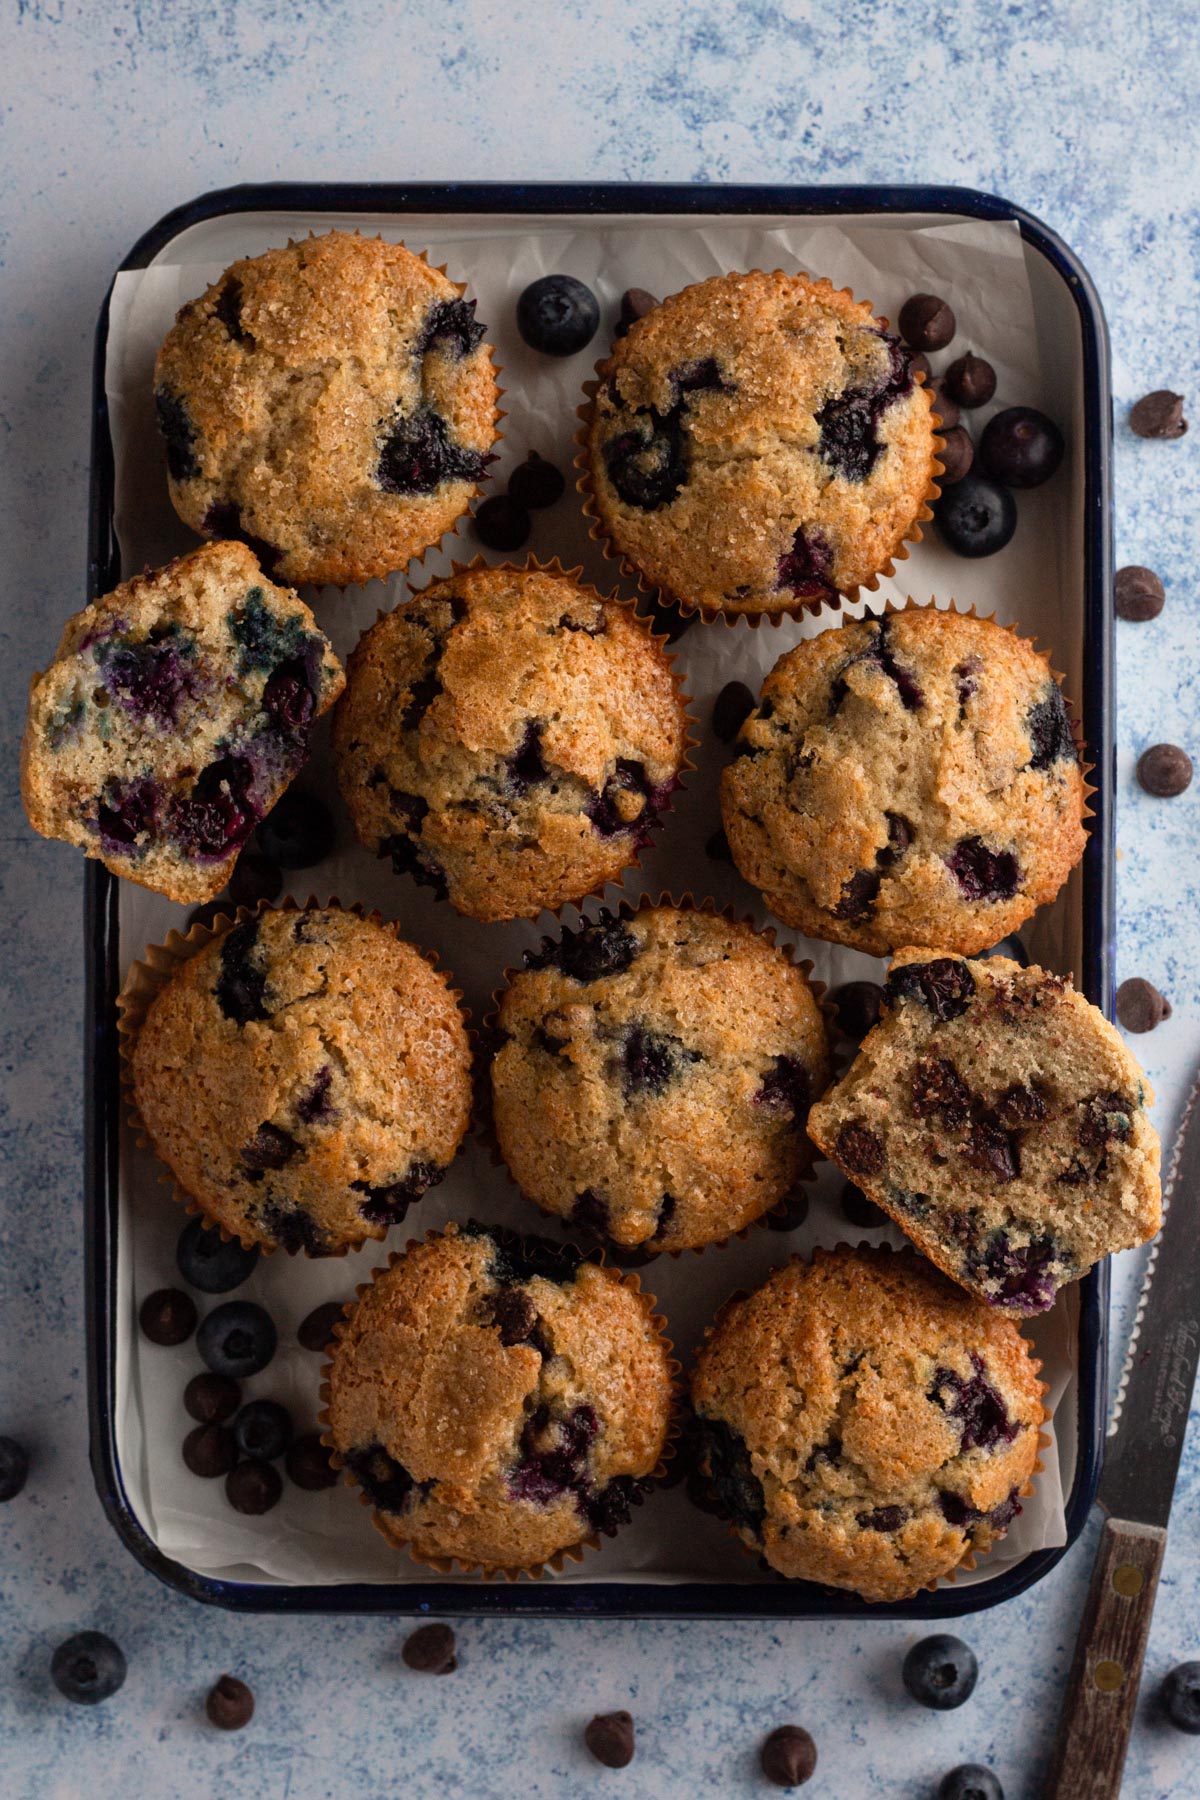 Overhead view of whole and sliced muffins on a rimmed tray surrounded by blueberries and chocolate chips.